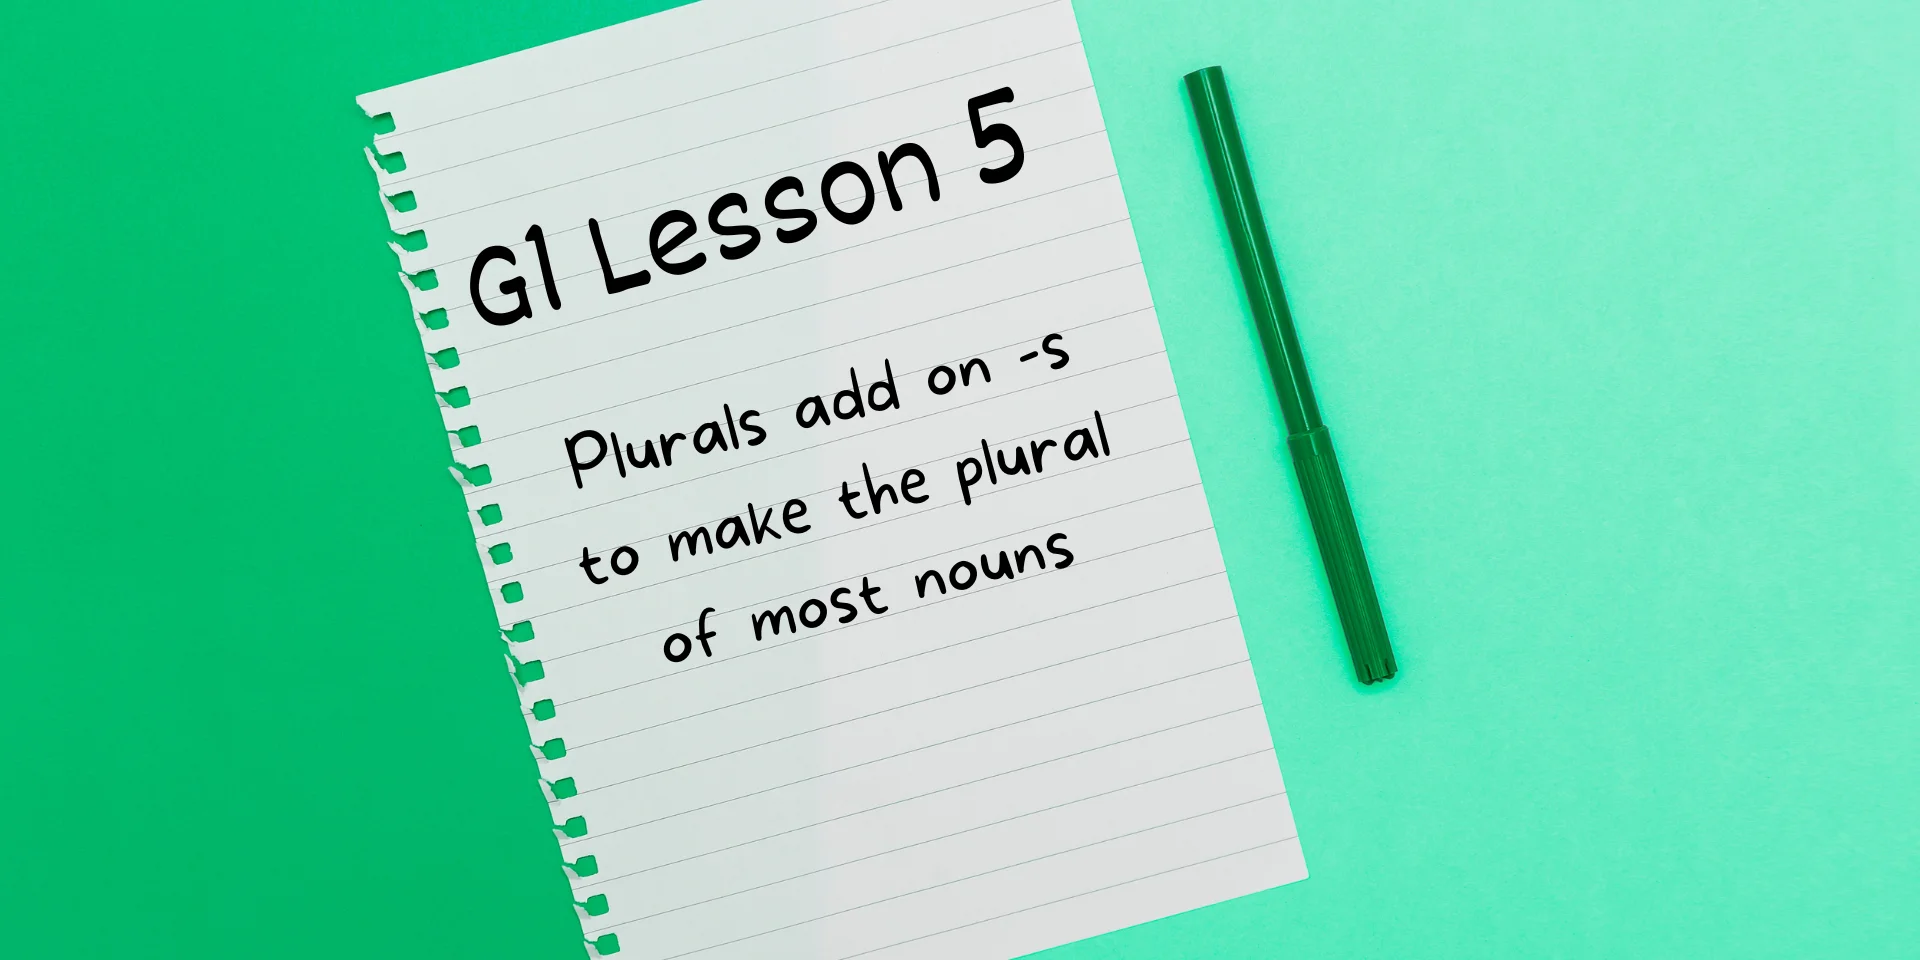 G1 Lesson 5 Plurals Add on -s to make the plural of most nouns